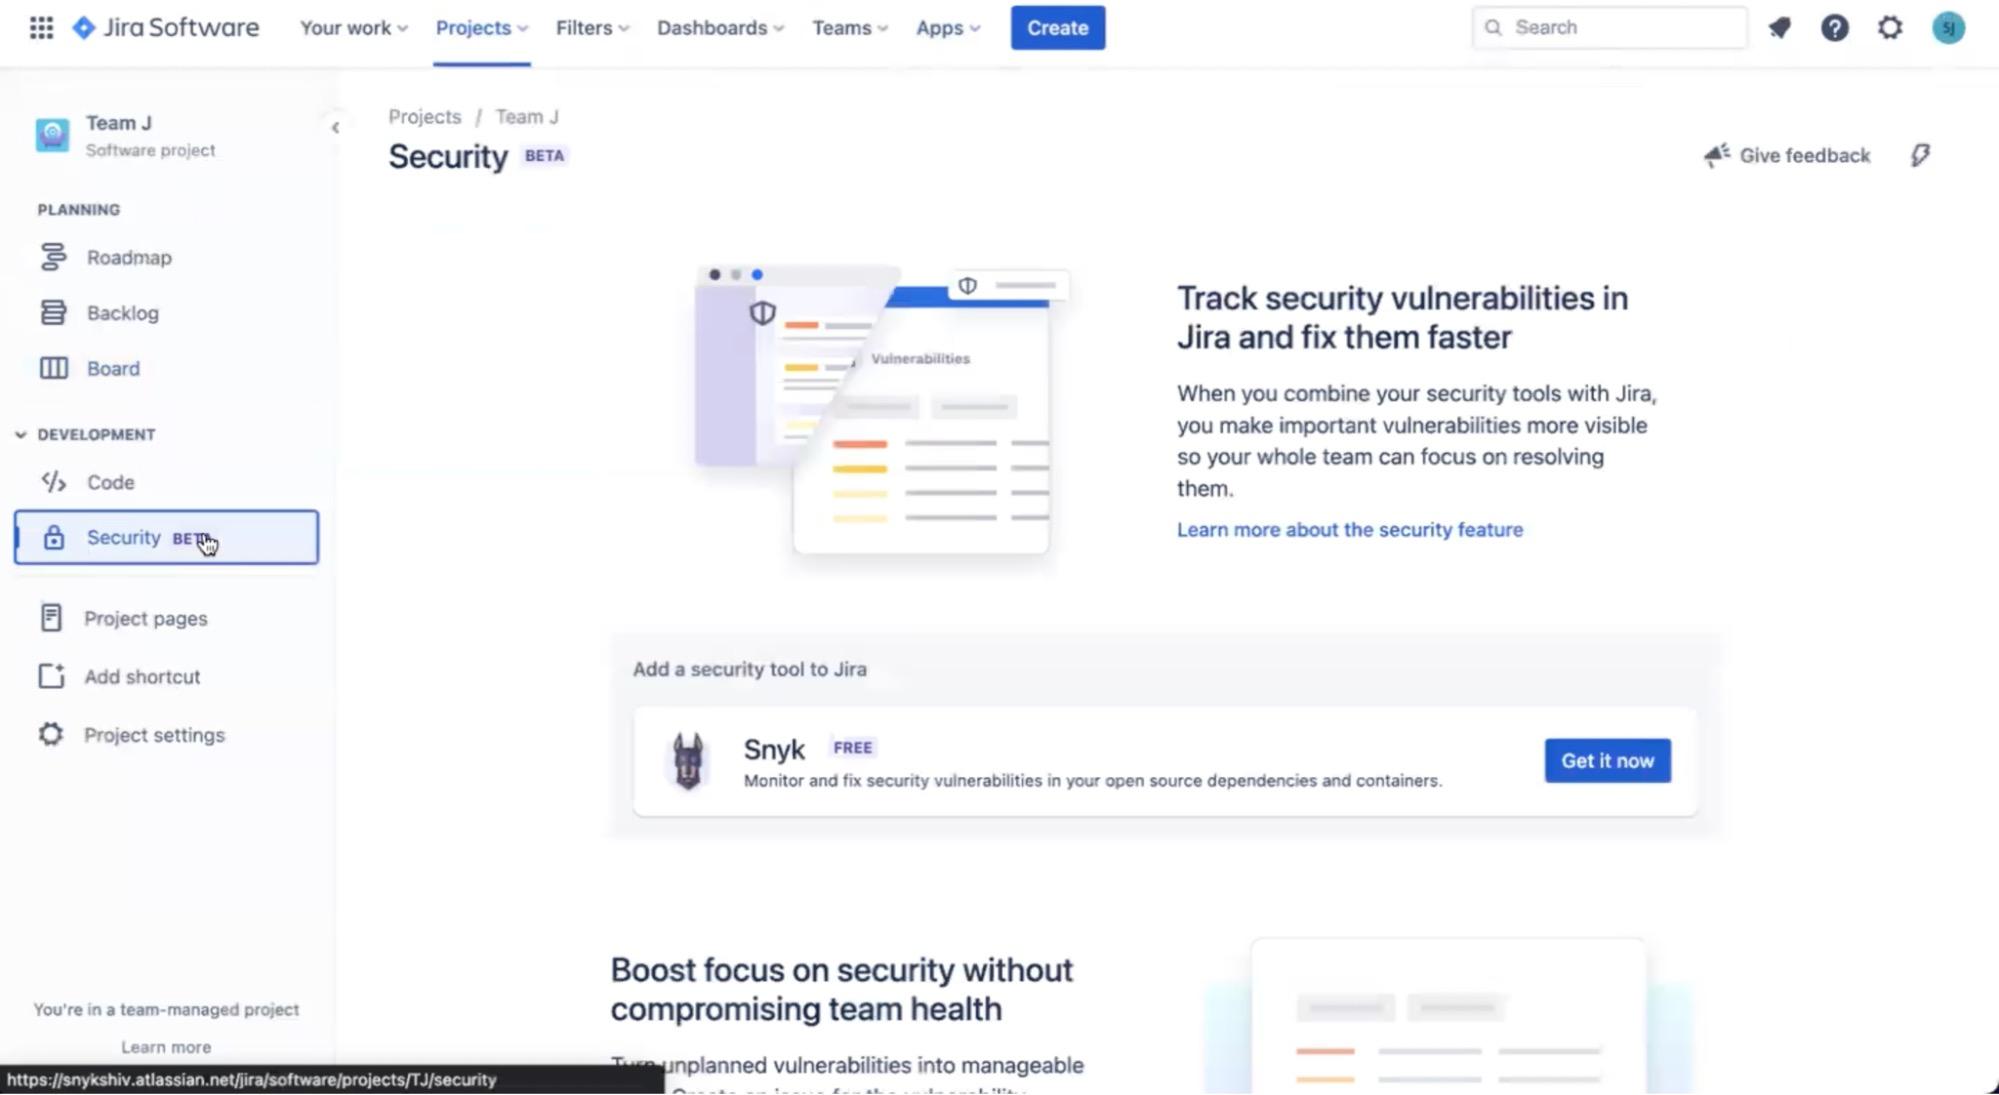 Screenshot showing how to install the Snyk Security in Jira Cloud app.